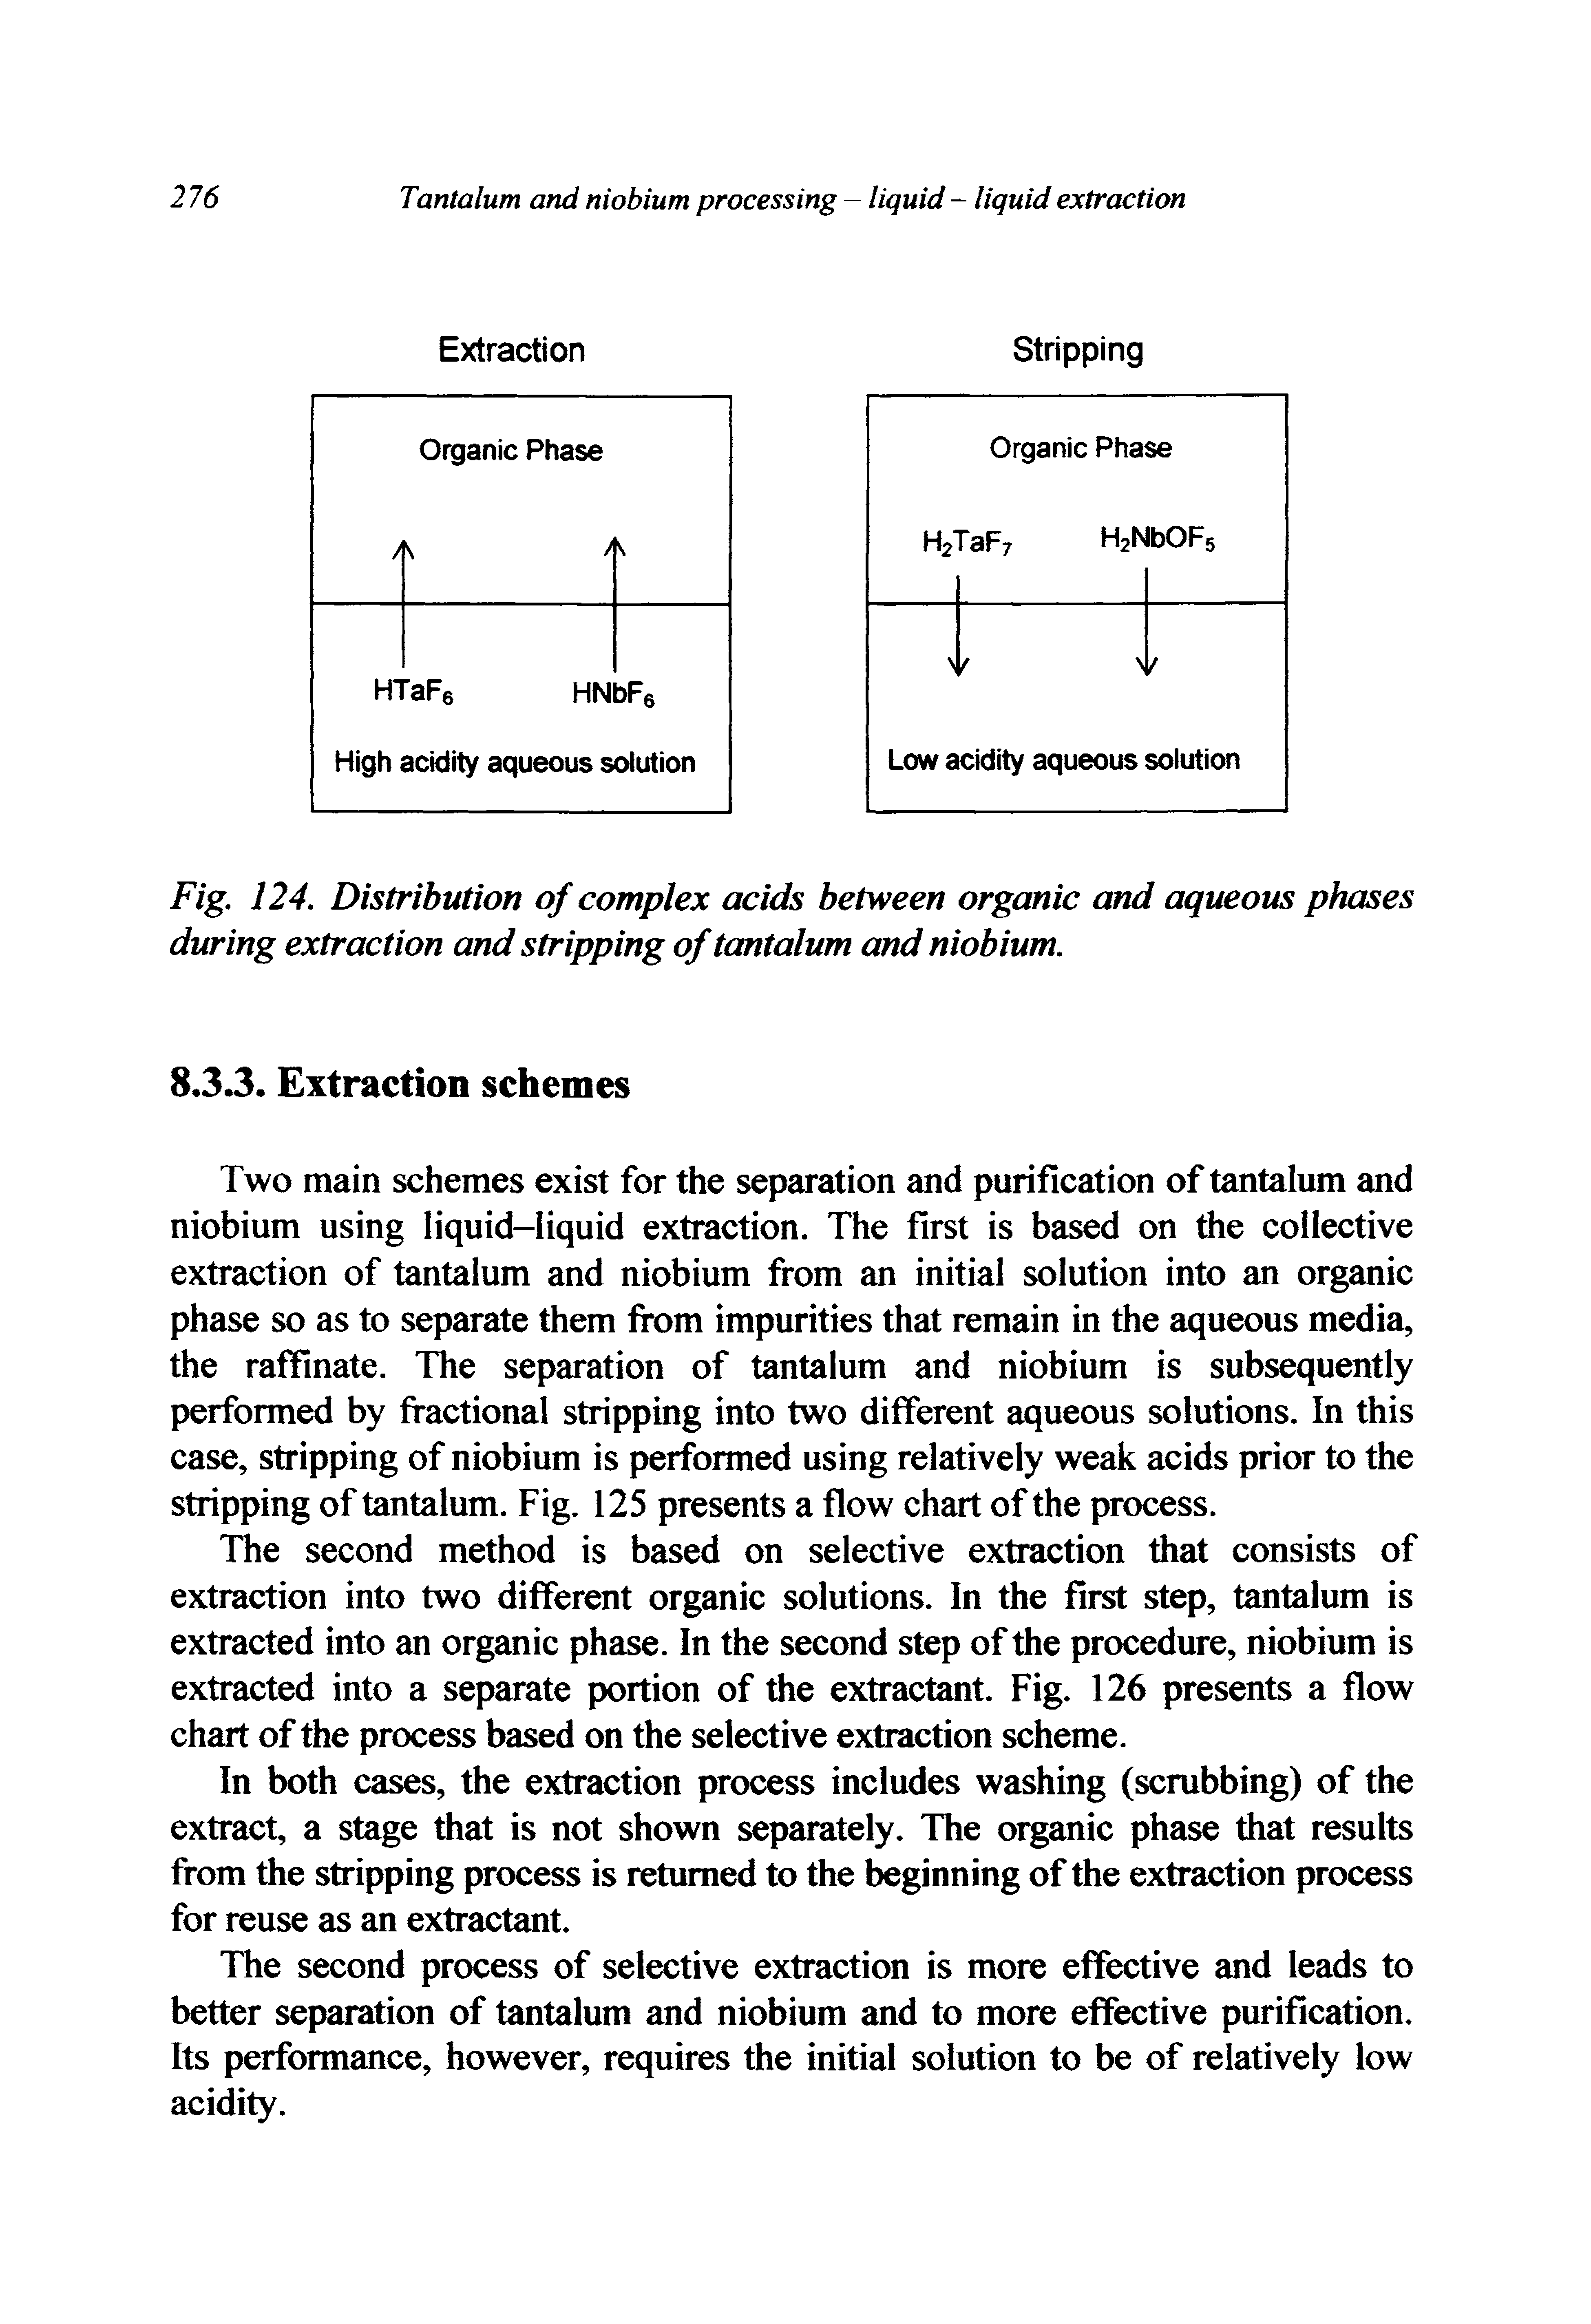 Fig. 124. Distribution of complex acids between organic and aqueous phases during extraction and stripping of tantalum and niobium.